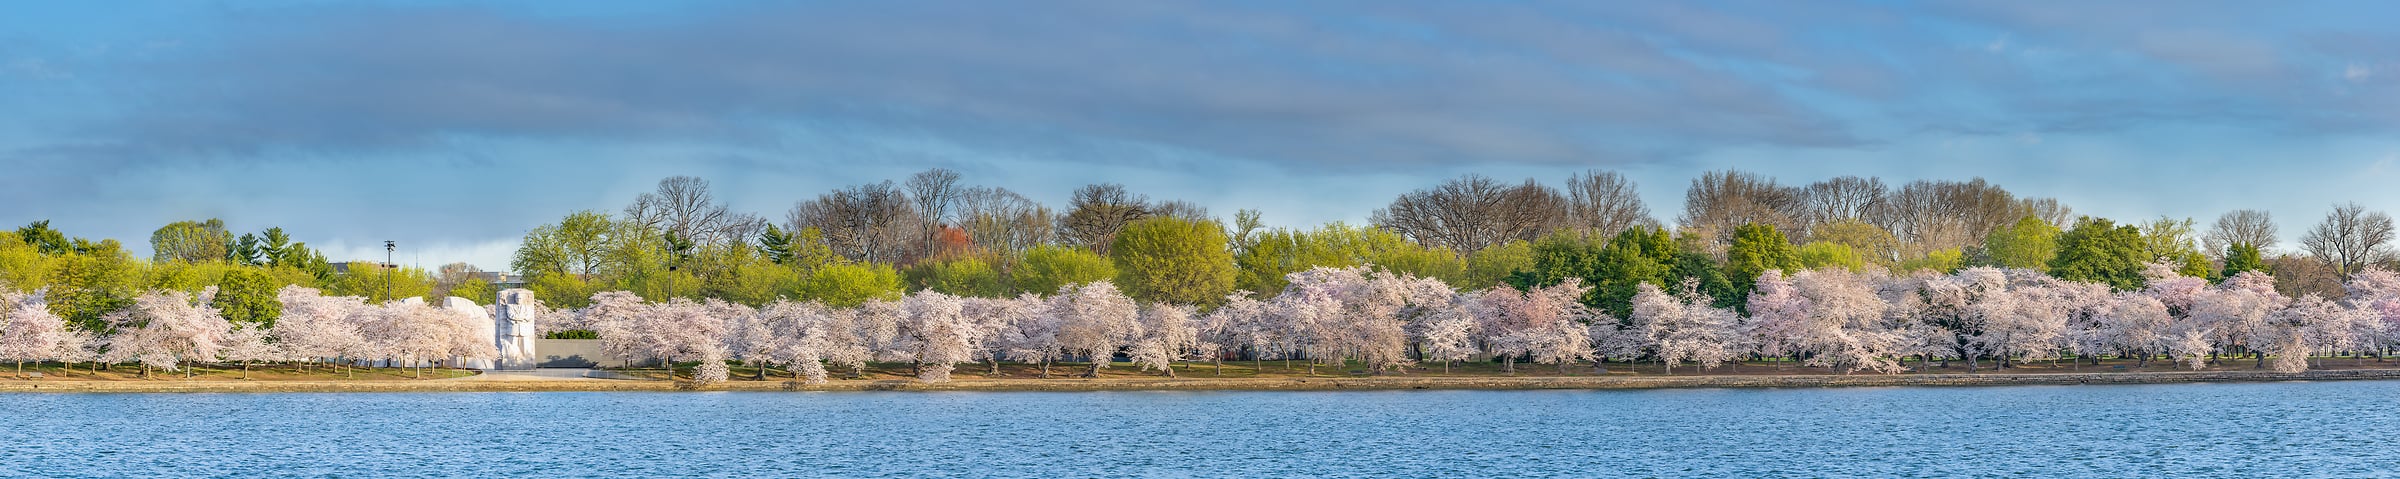 1,343 megapixels! A very high resolution, large-format VAST photo print of the cherry blossoms around the Tidal Basin in Washington DC with the Martin Luther King, Jr. Memorial; photograph created by Tim Lo Monaco on the National Mall in Washington, D.C.